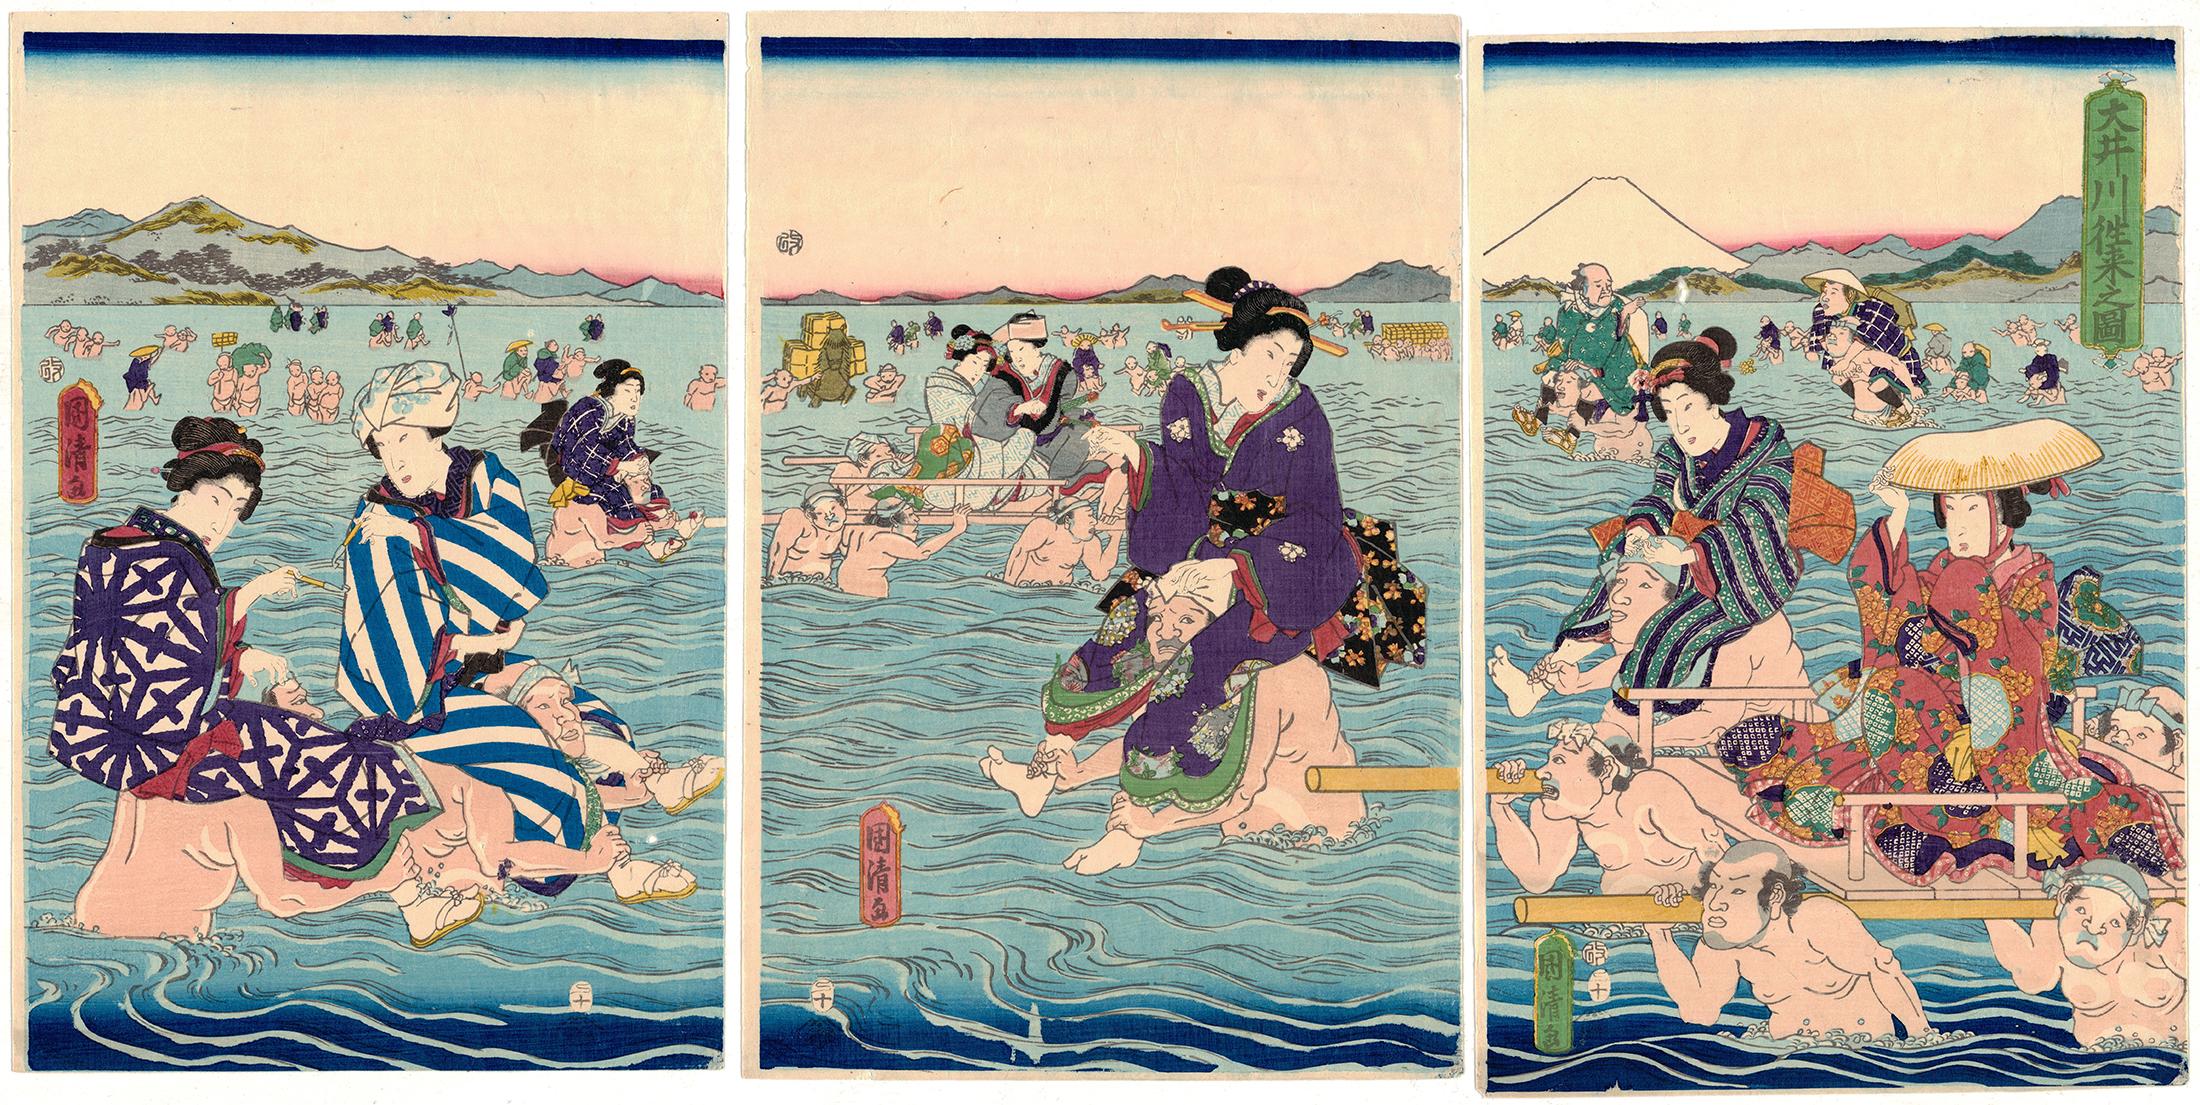 Artist: Kunikiyo Utagawa 
Description: Crossing the Ooi River
Publisher: Tsutaya Kichizo
Date: 1857
Dimensions: (R) 25.3 x 37.6 (C) 25.5 x 37.7 (L) 25.3 x 37.5 cm

While little is known about the artist of this work, the image he depicted appeared